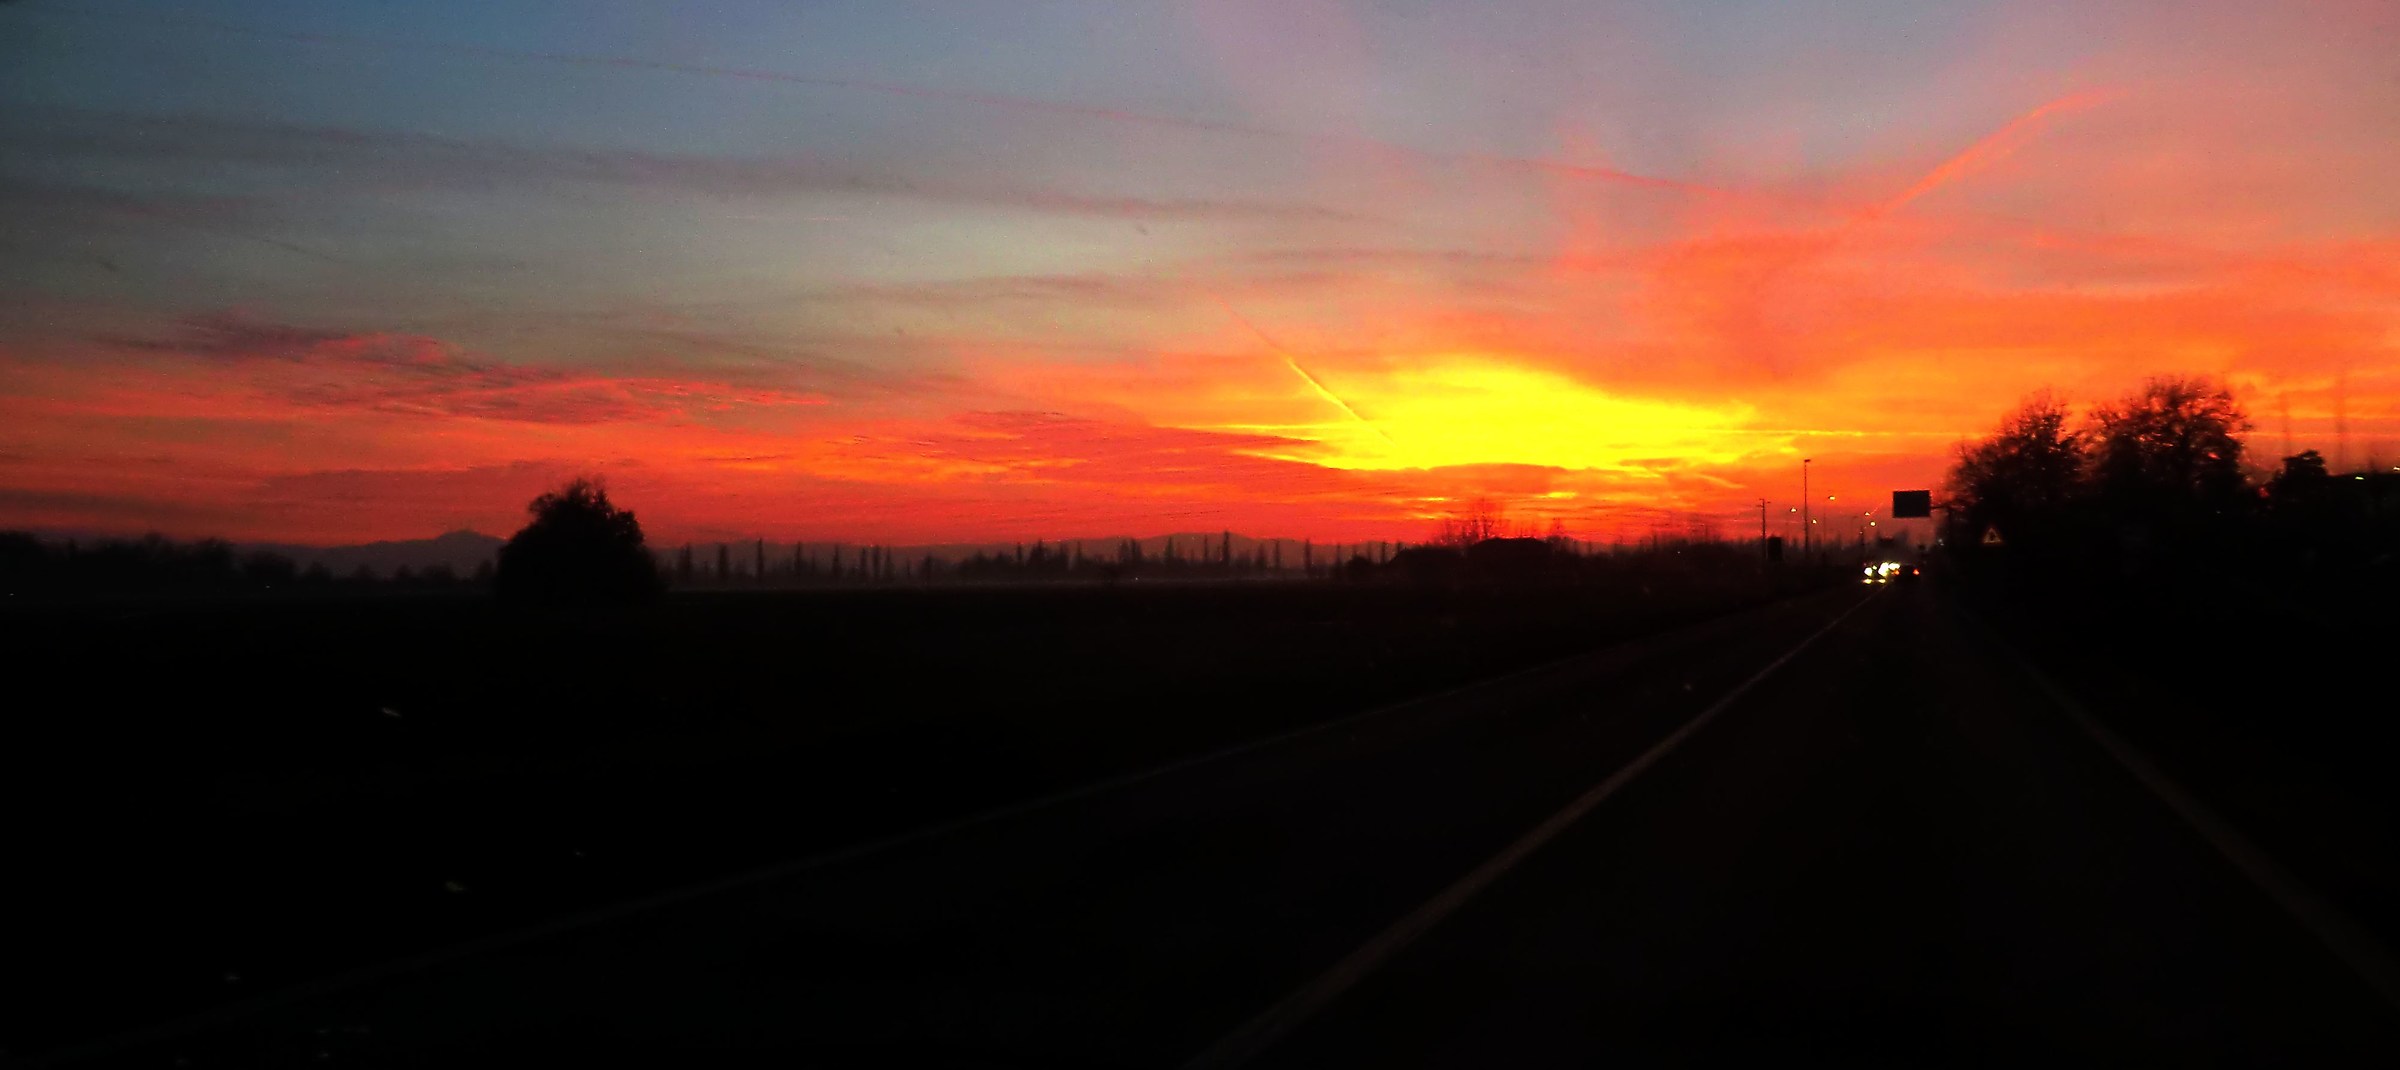 Returning to Modena in the evening...